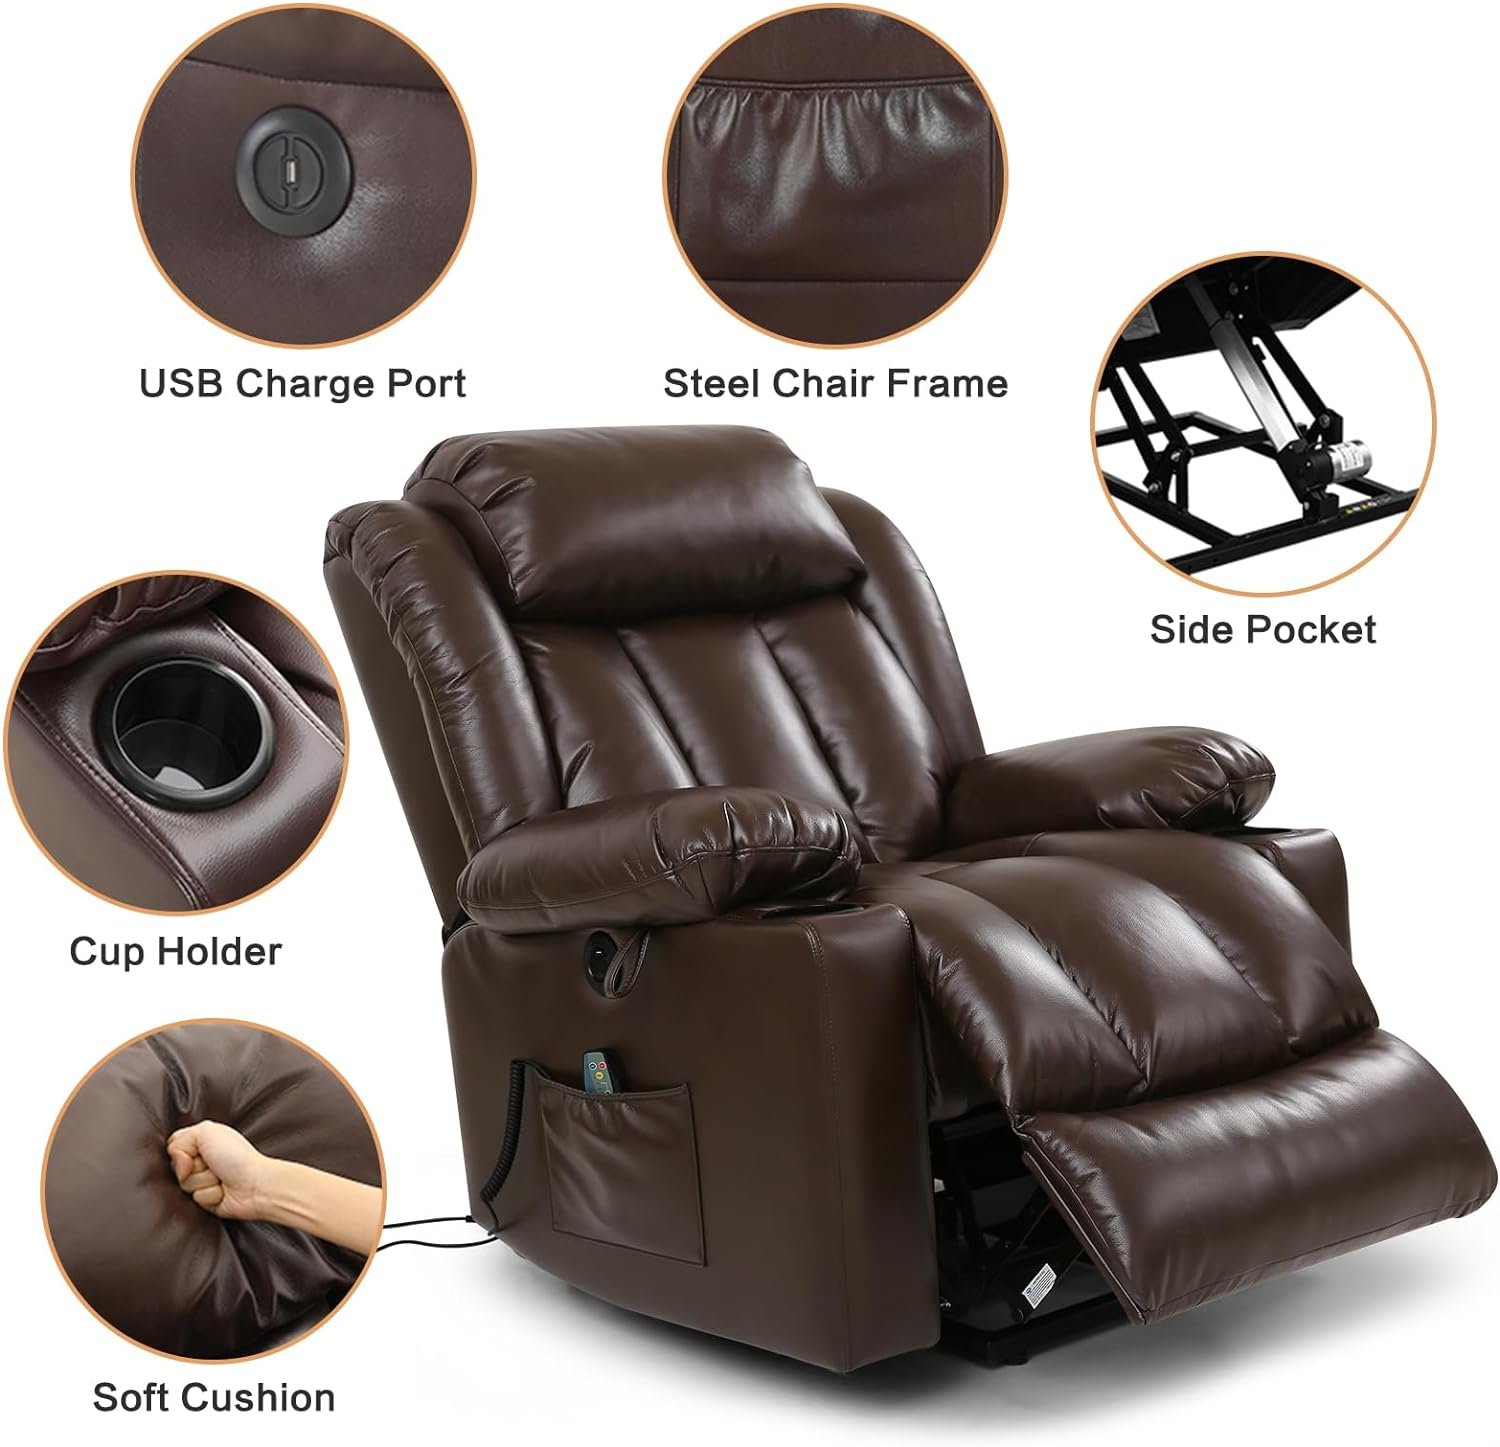 Power Lift Recliner Chair for Elderly Breathable Leather Recliner Chair with Massage and Heat for People Limited Mobility,Electric Stand Assist,2 Cup Holders,USB Ports,Gifts for Family (Grey)